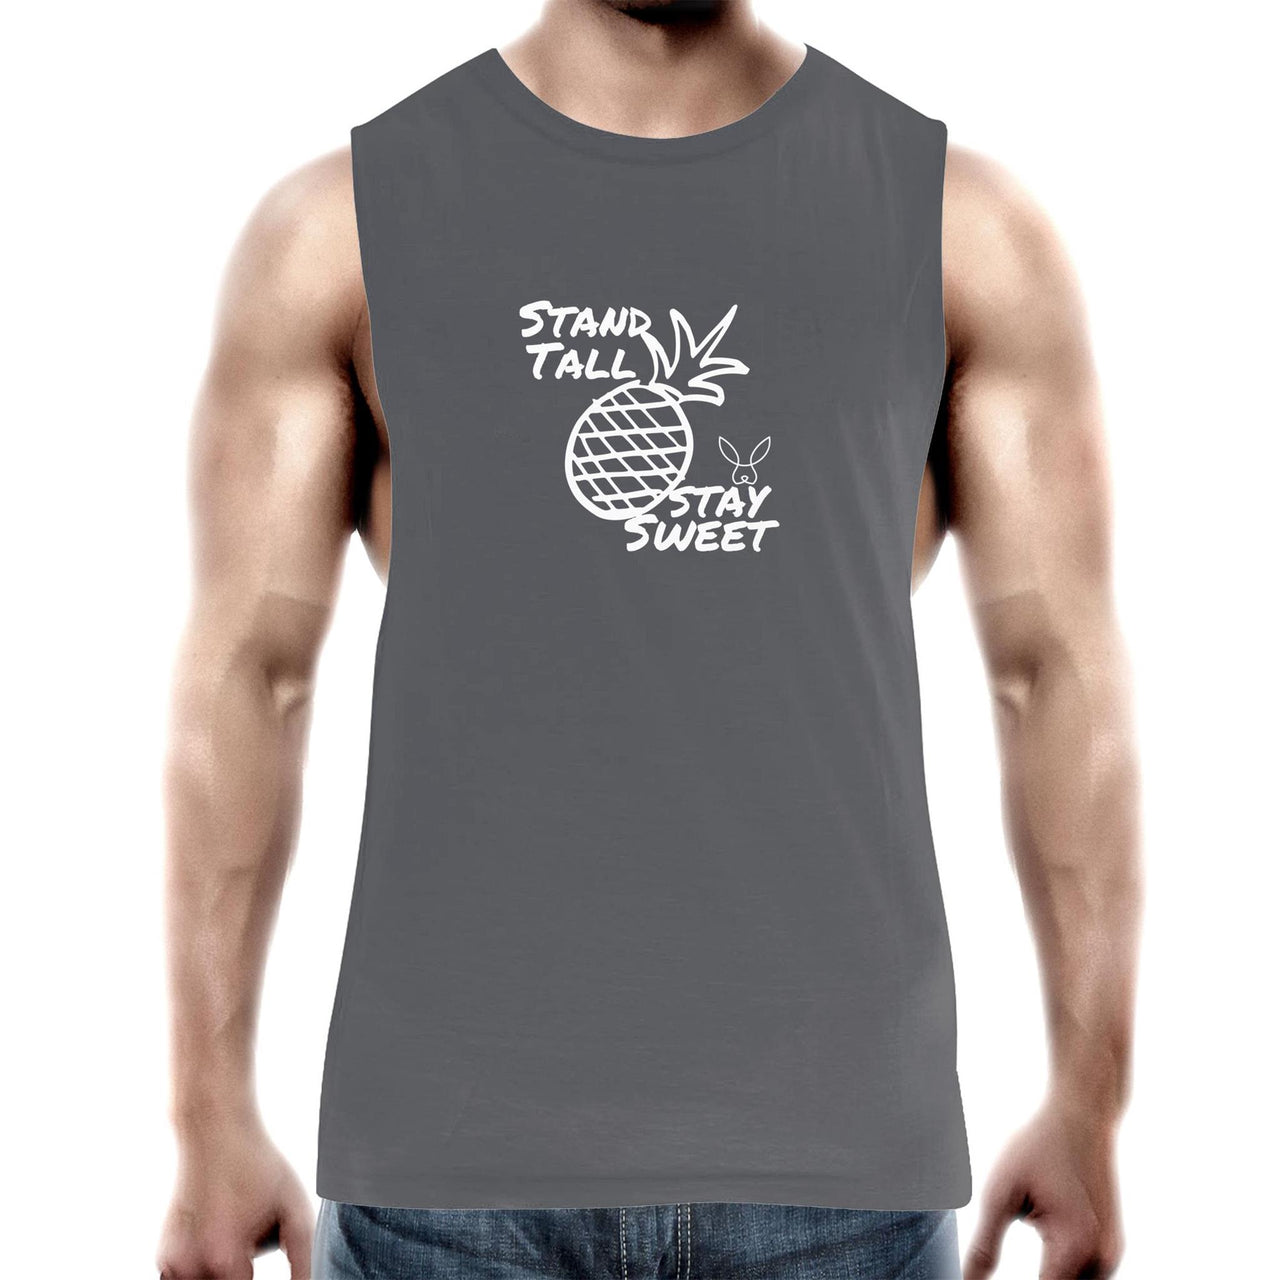 Stand Tall Tank Top Tee by CBF Clothing in Charcoal